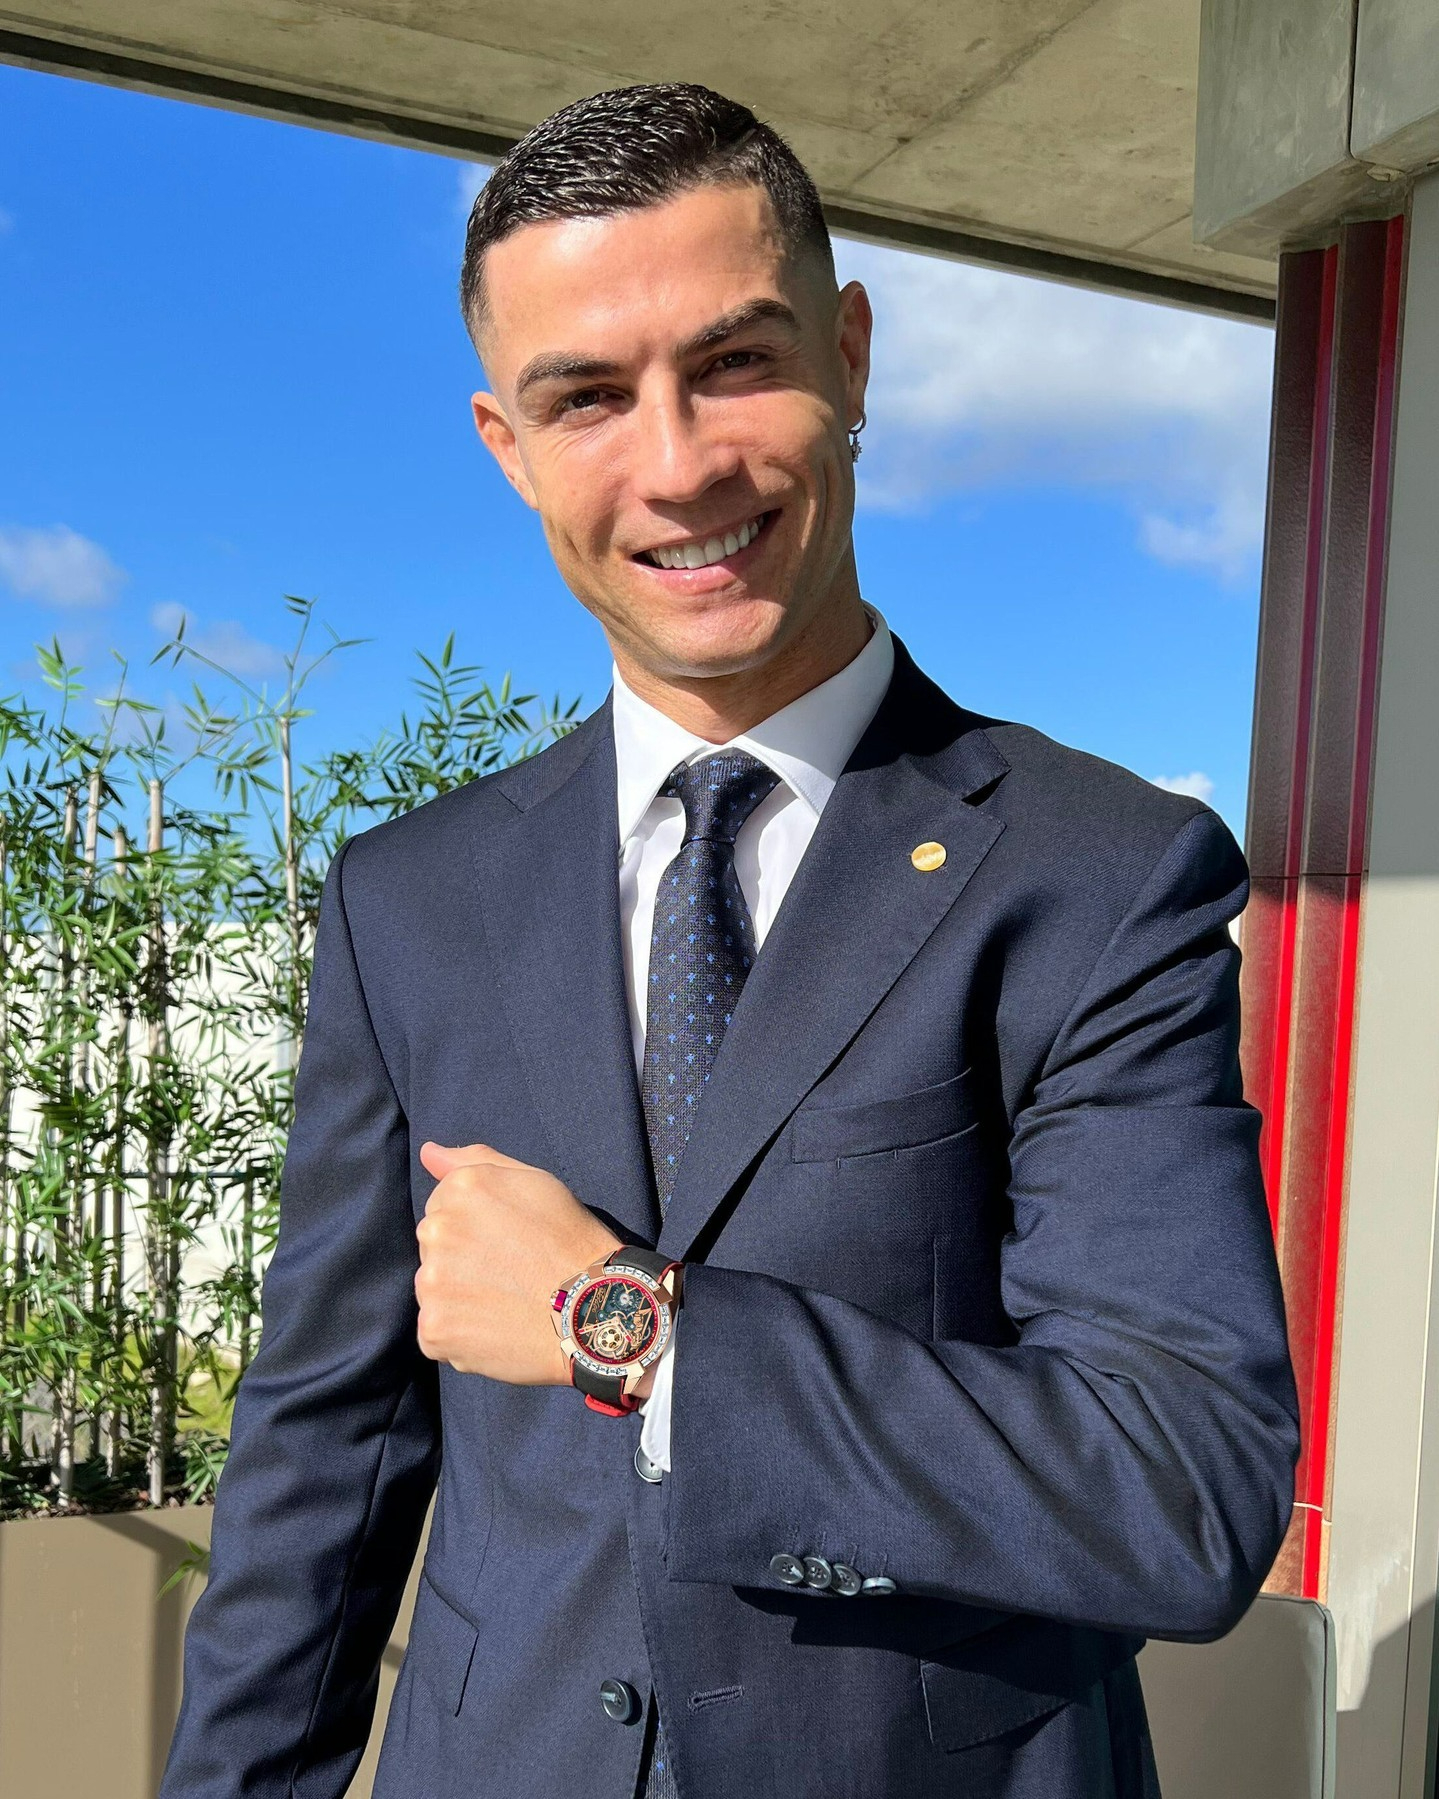 Cristiano Ronaldo is an avid watch collection